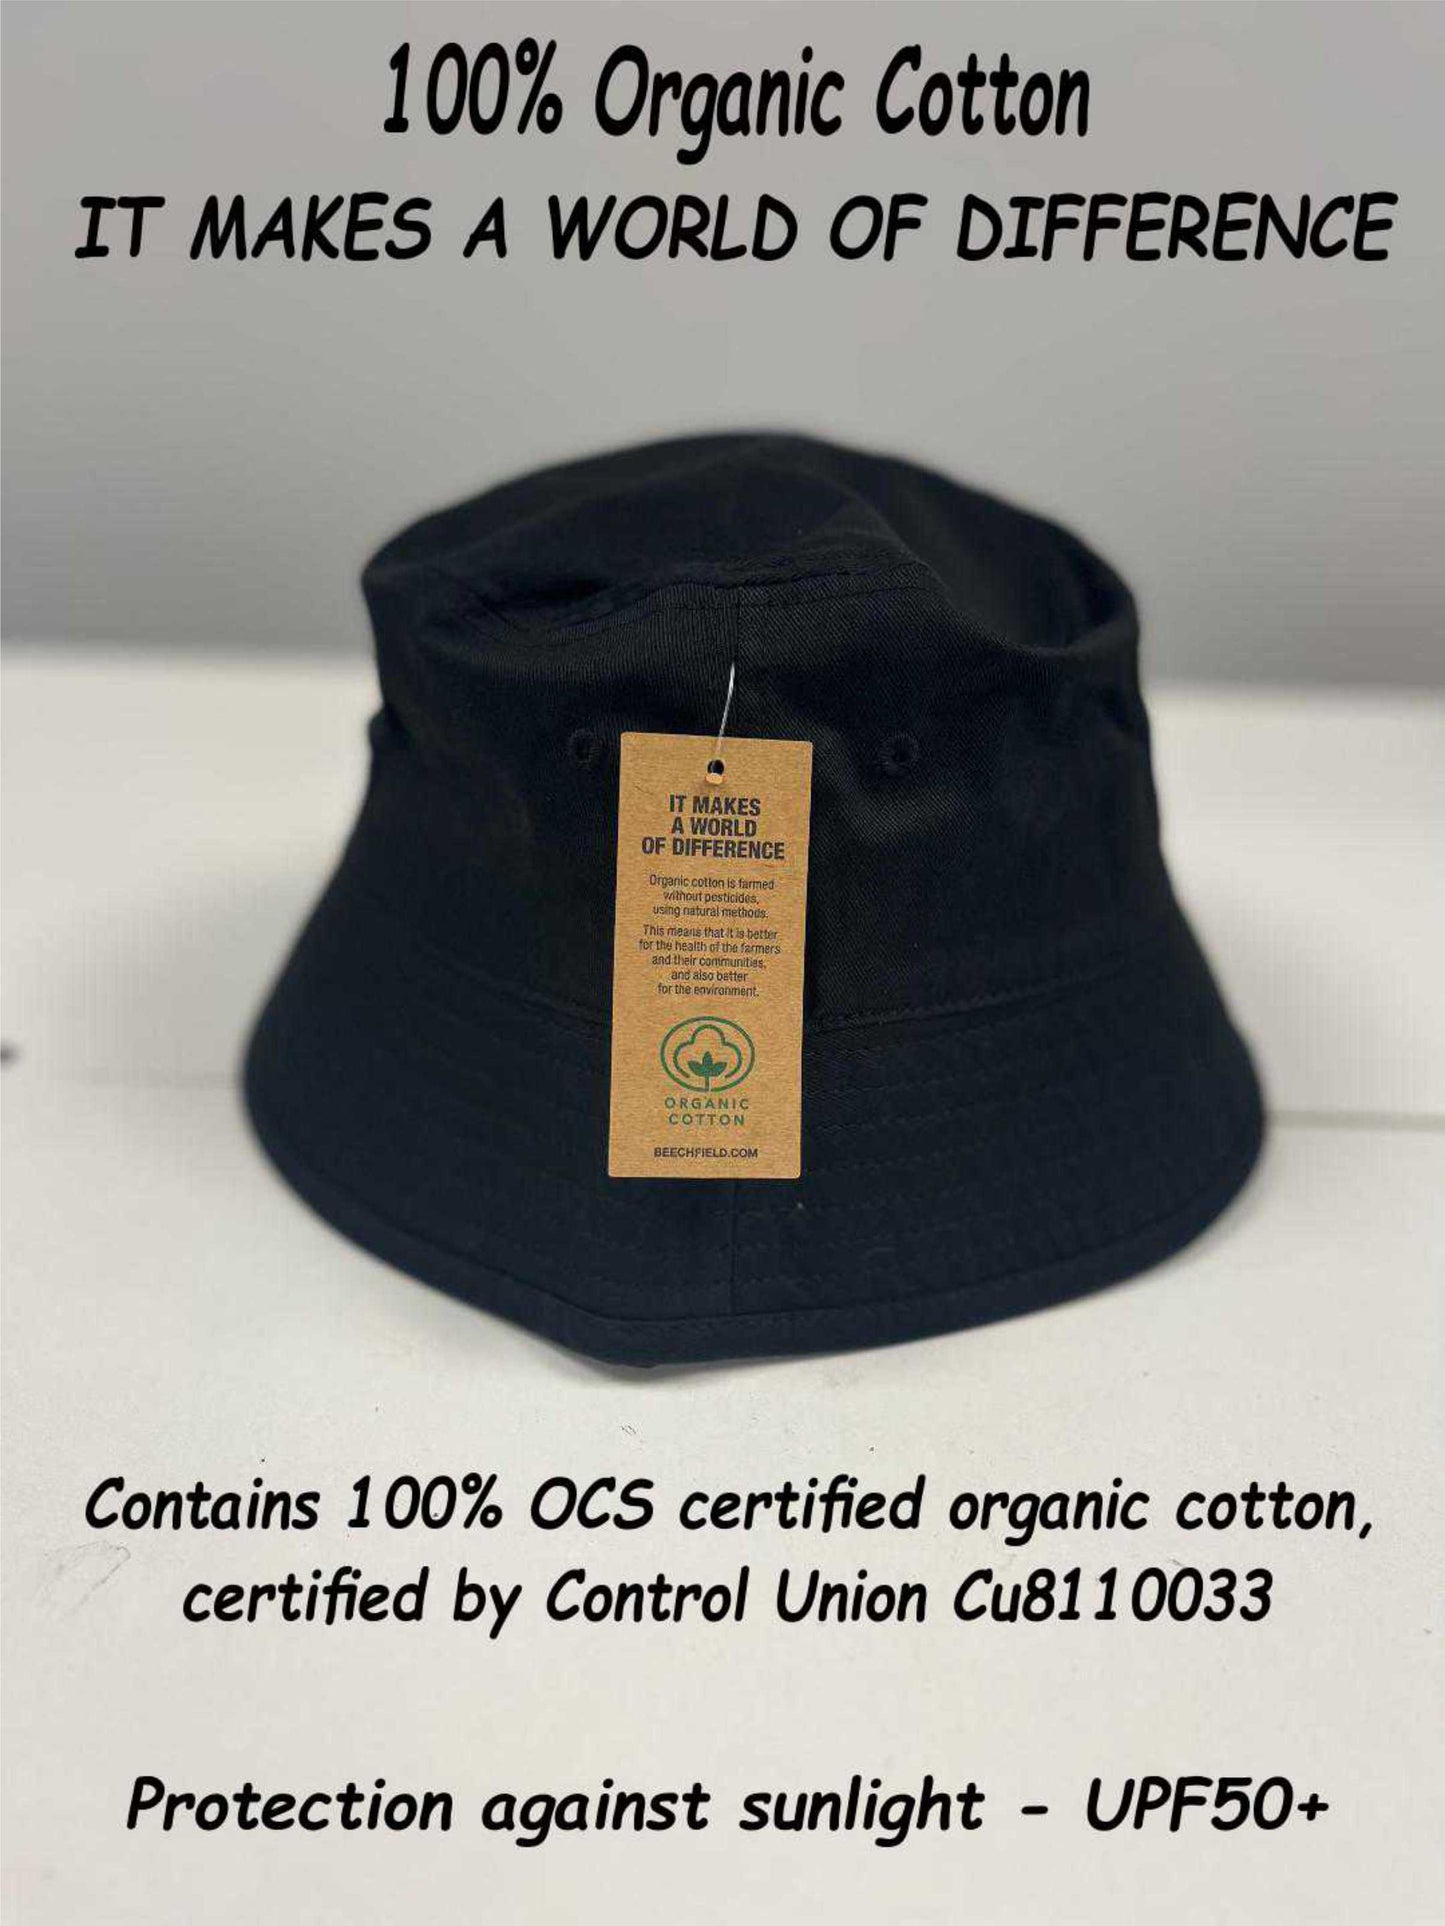 Warning May Talk About Trainspotting Bucket Hat Gift for Men & Ladies